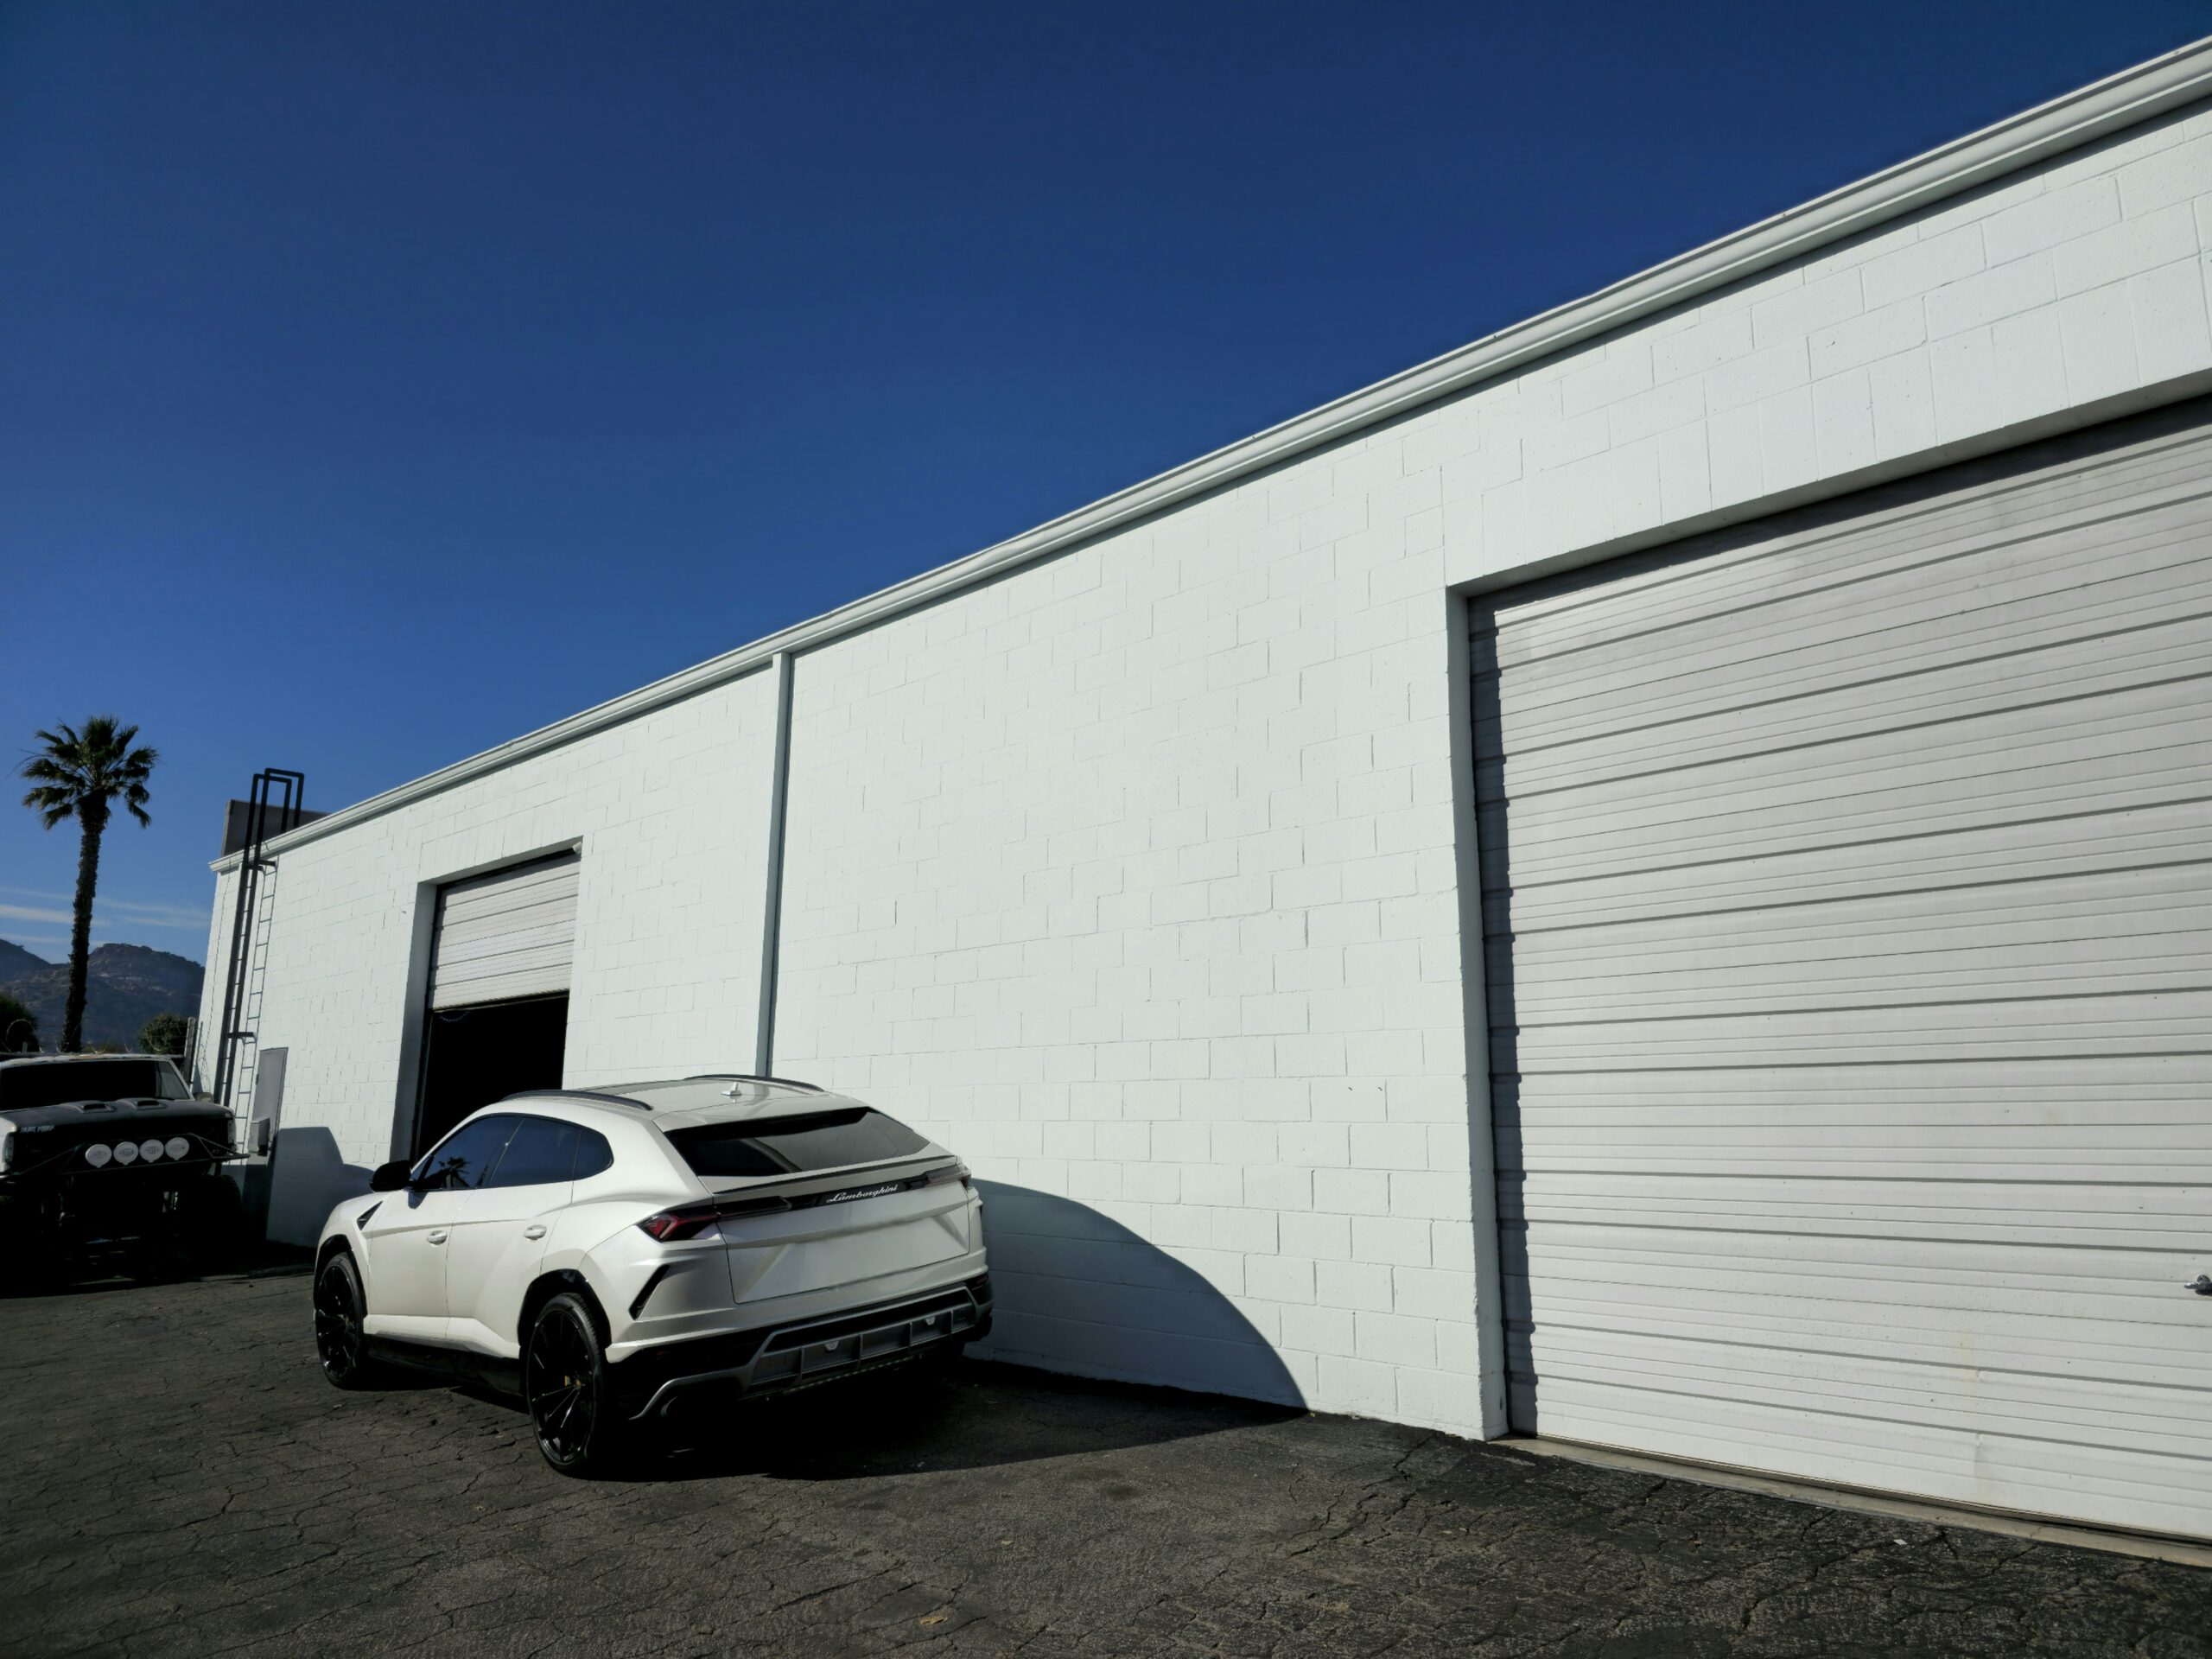 A commercial car/mechanic shop with exterior white wall freshly painted and clean.